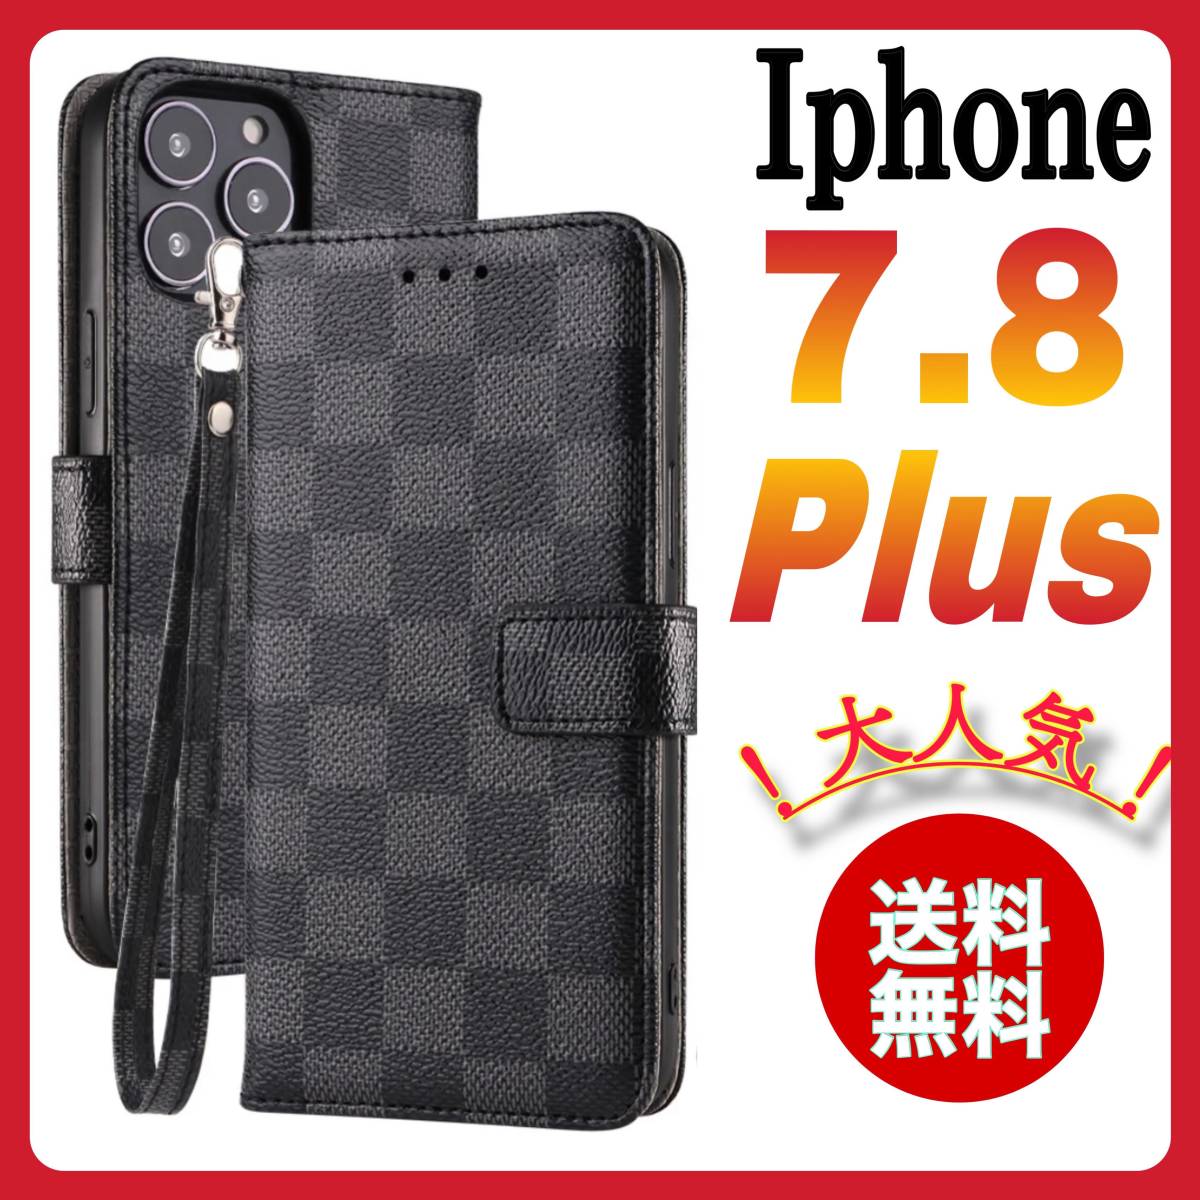 Iphone7Plus iphone8Plus case notebook type black color check pattern PU leather great popularity simple slim Schic high class design Impact-proof card storage stylish 